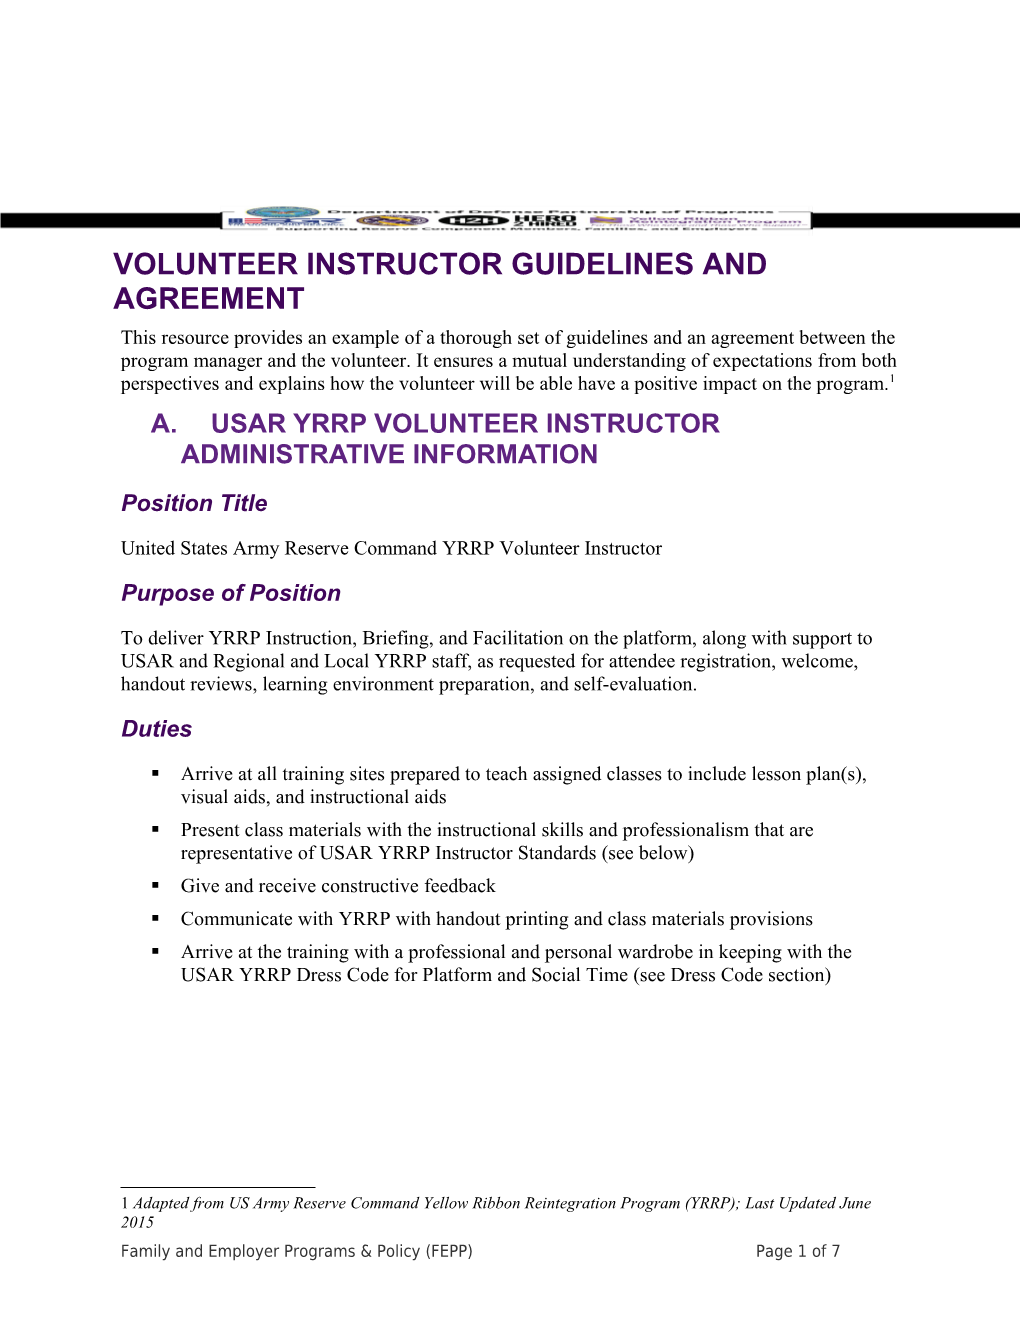 Volunteer Instructor Guidelines and Agreement